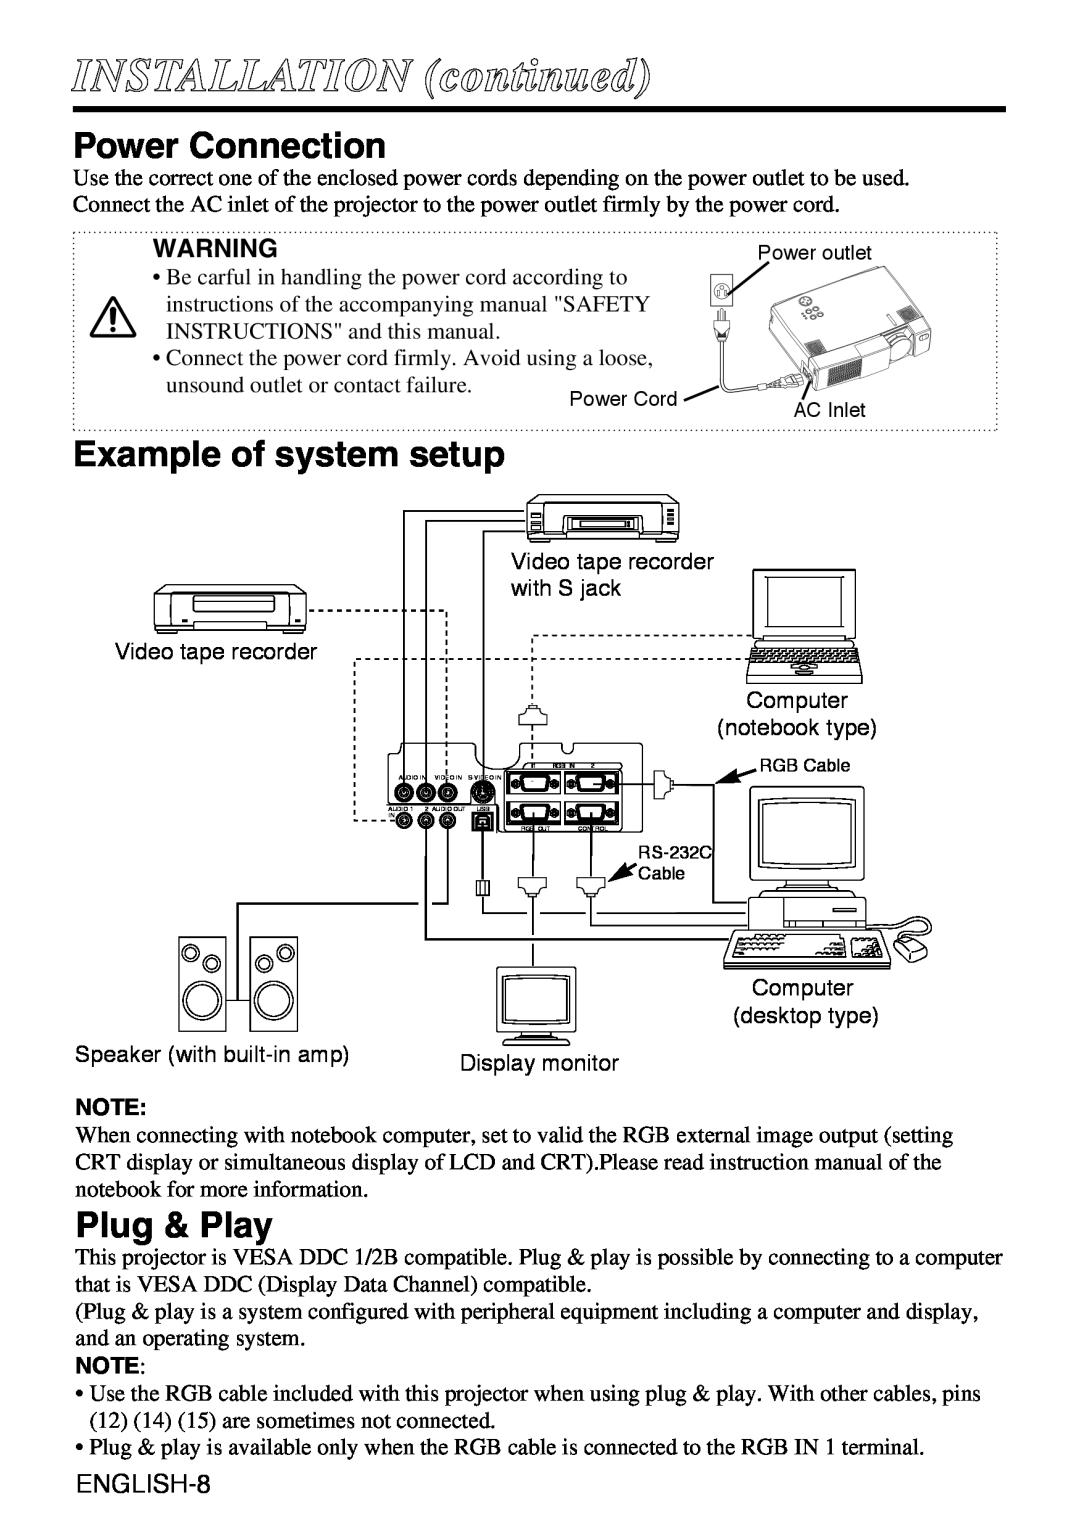 Liesegang dv335 user manual Power Connection, Example of system setup, Plug & Play, ENGLISH-8, INSTALLATION continued 